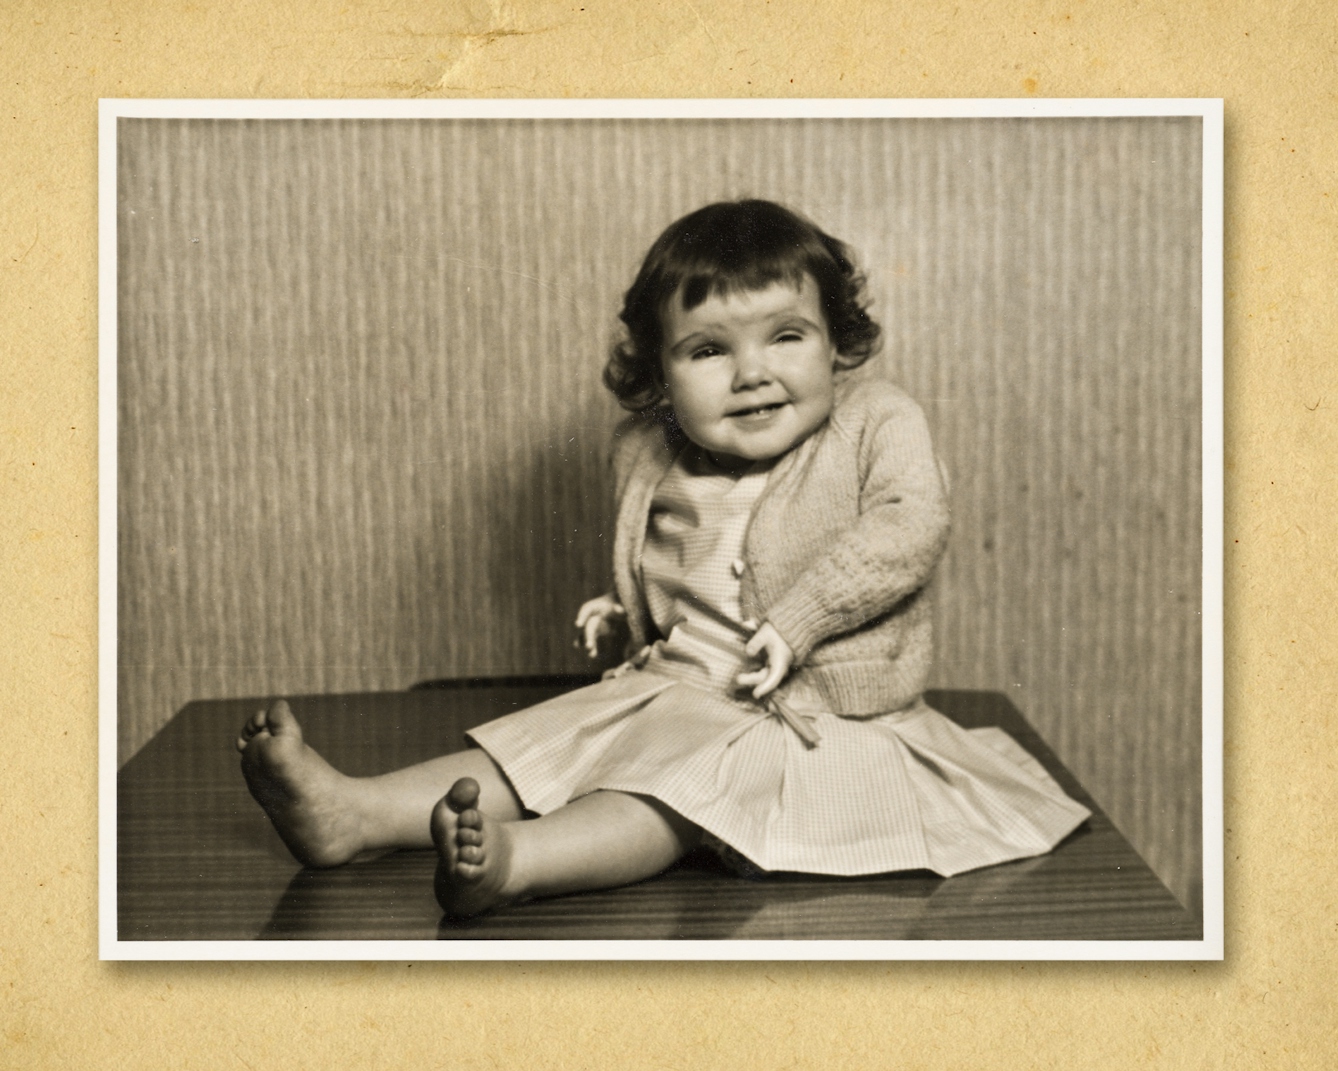 Photograph of a black and white photographic print, resting on a brown paper textured background. The print shows a small young girl sitting with her legs stretched out in front of her, on what looks like a tabletop. Behind her is a wall covered in a textured wallpaper with a vertical pattern. She is wearing a dress and cardigan. She is smiling and looking off slightly right of camera. The arms in her cardigan sleeves are prosthetic arms. The girls mother was prescribed Thalidomide during her pregnancy.